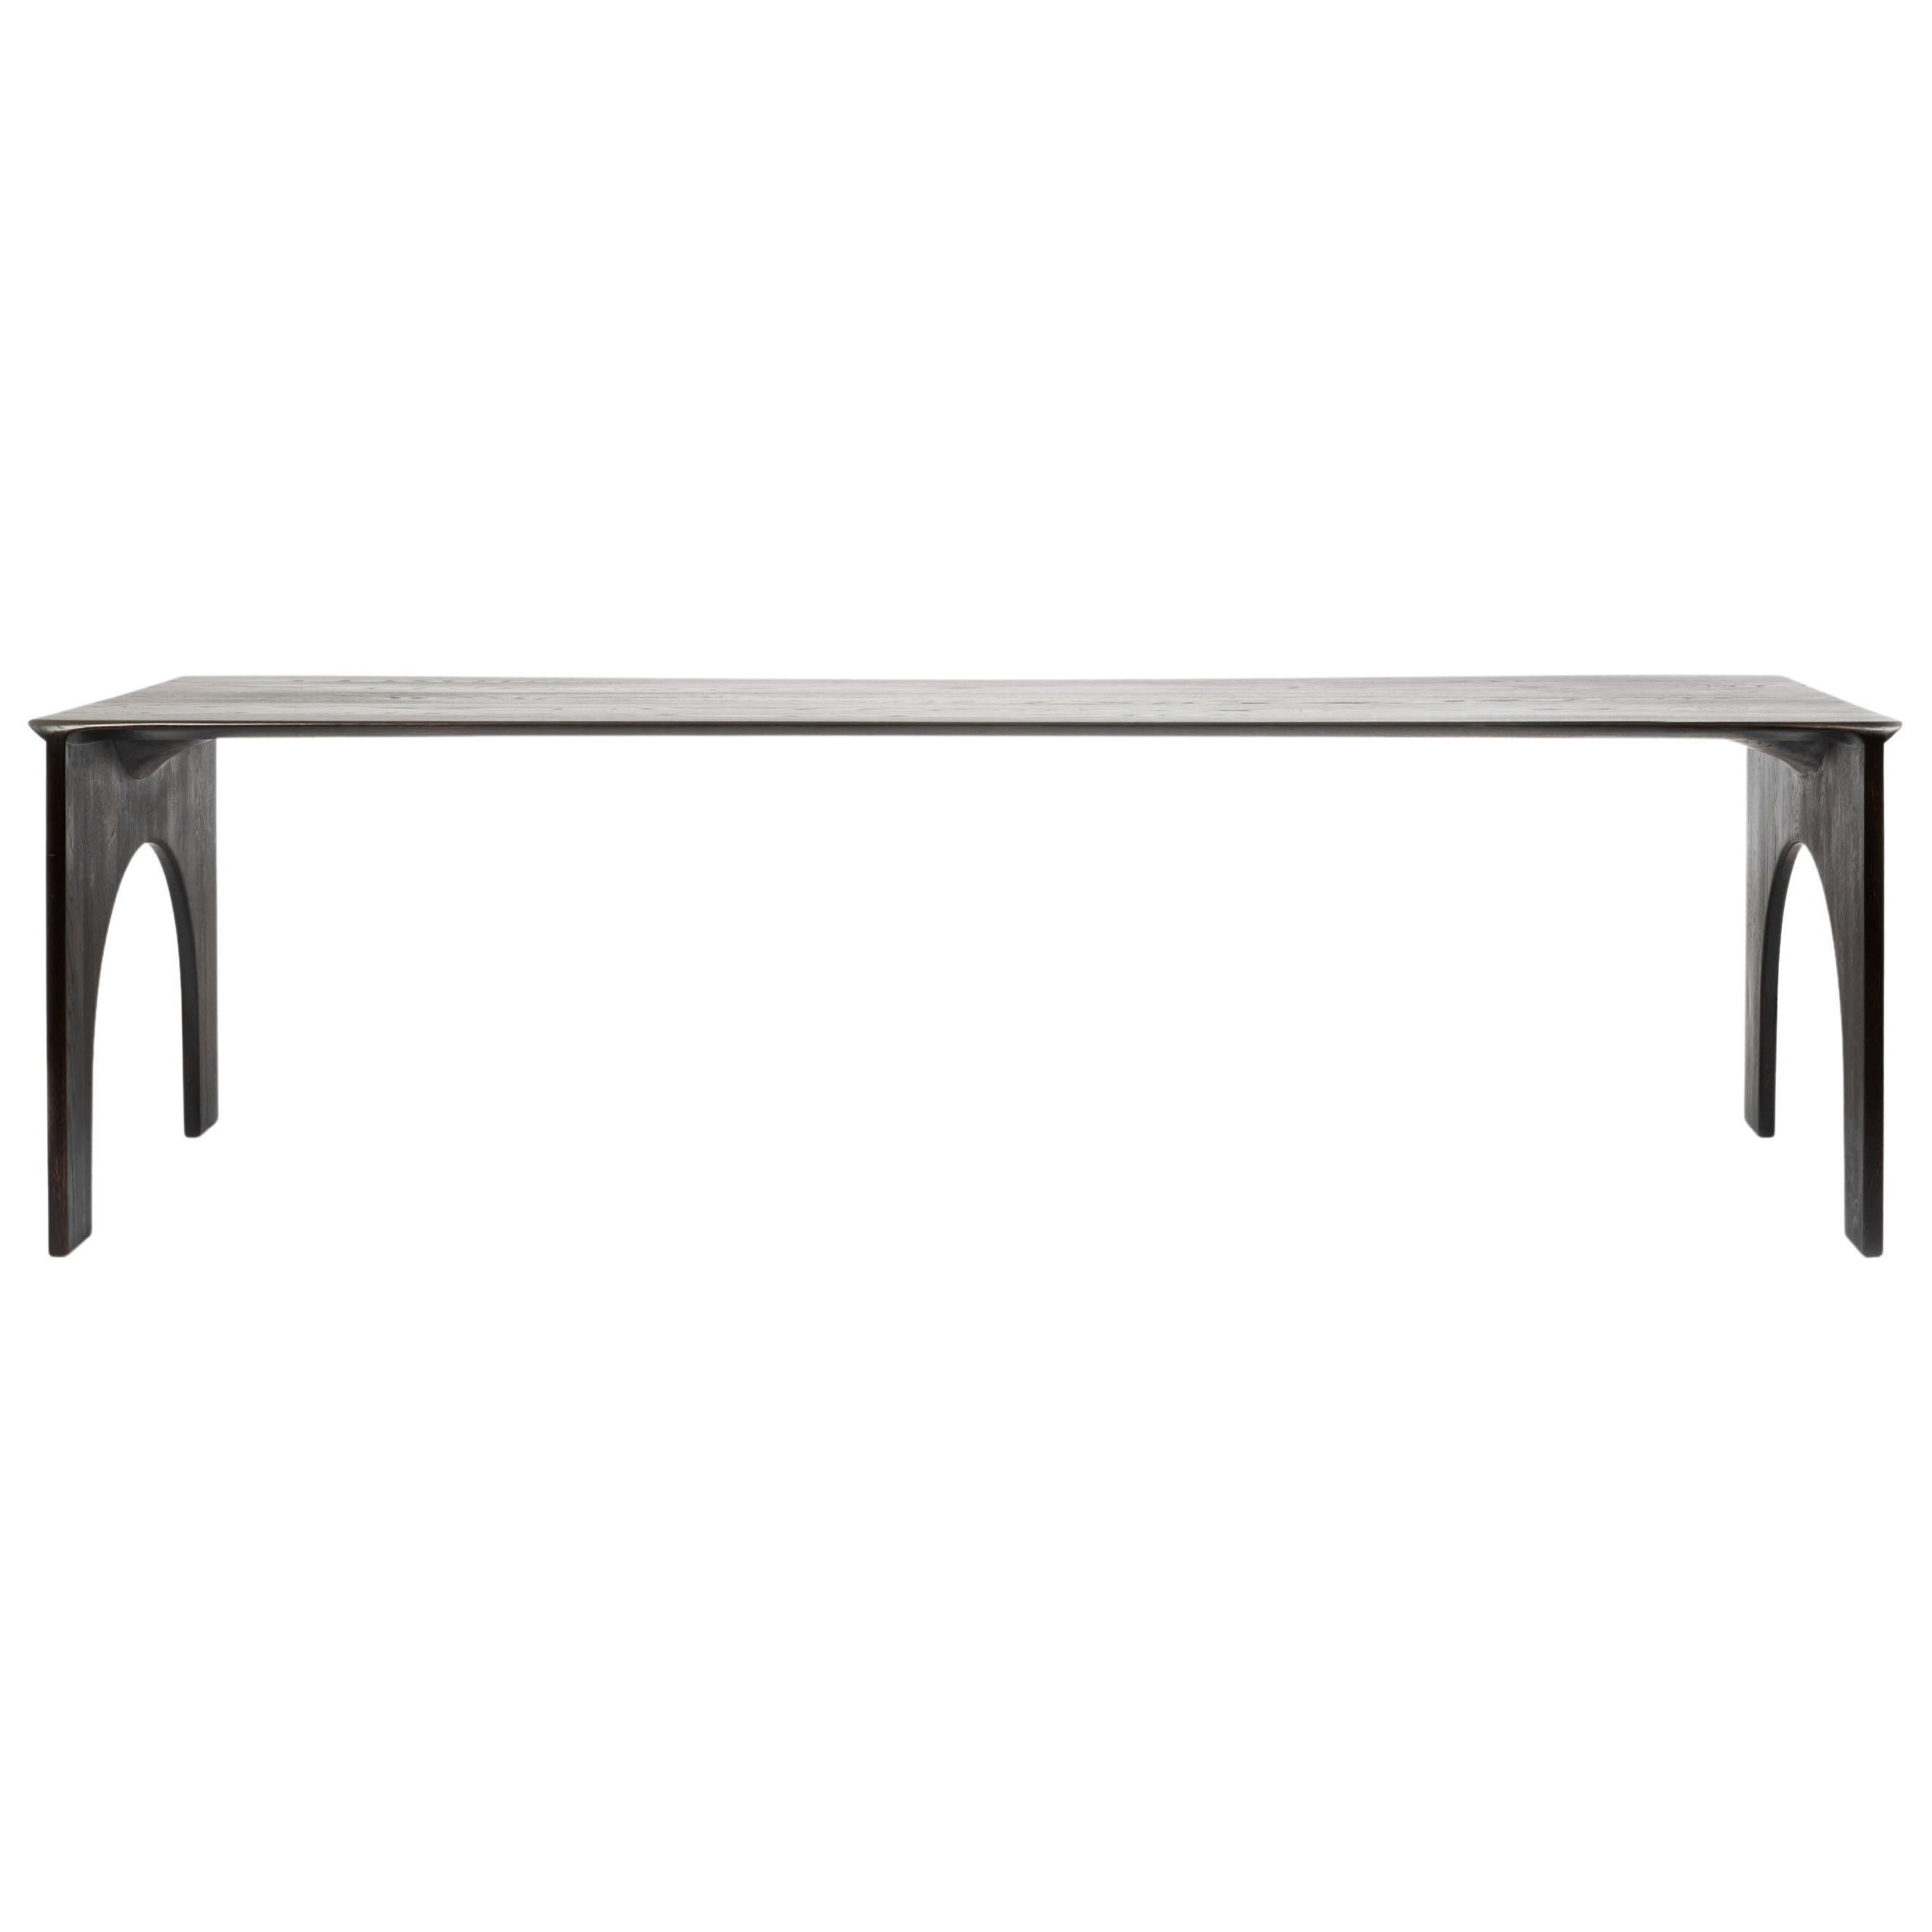 Contemporary Burned Solid Oak Kuro Dining Table Narrow, by Lukas Cober For Sale